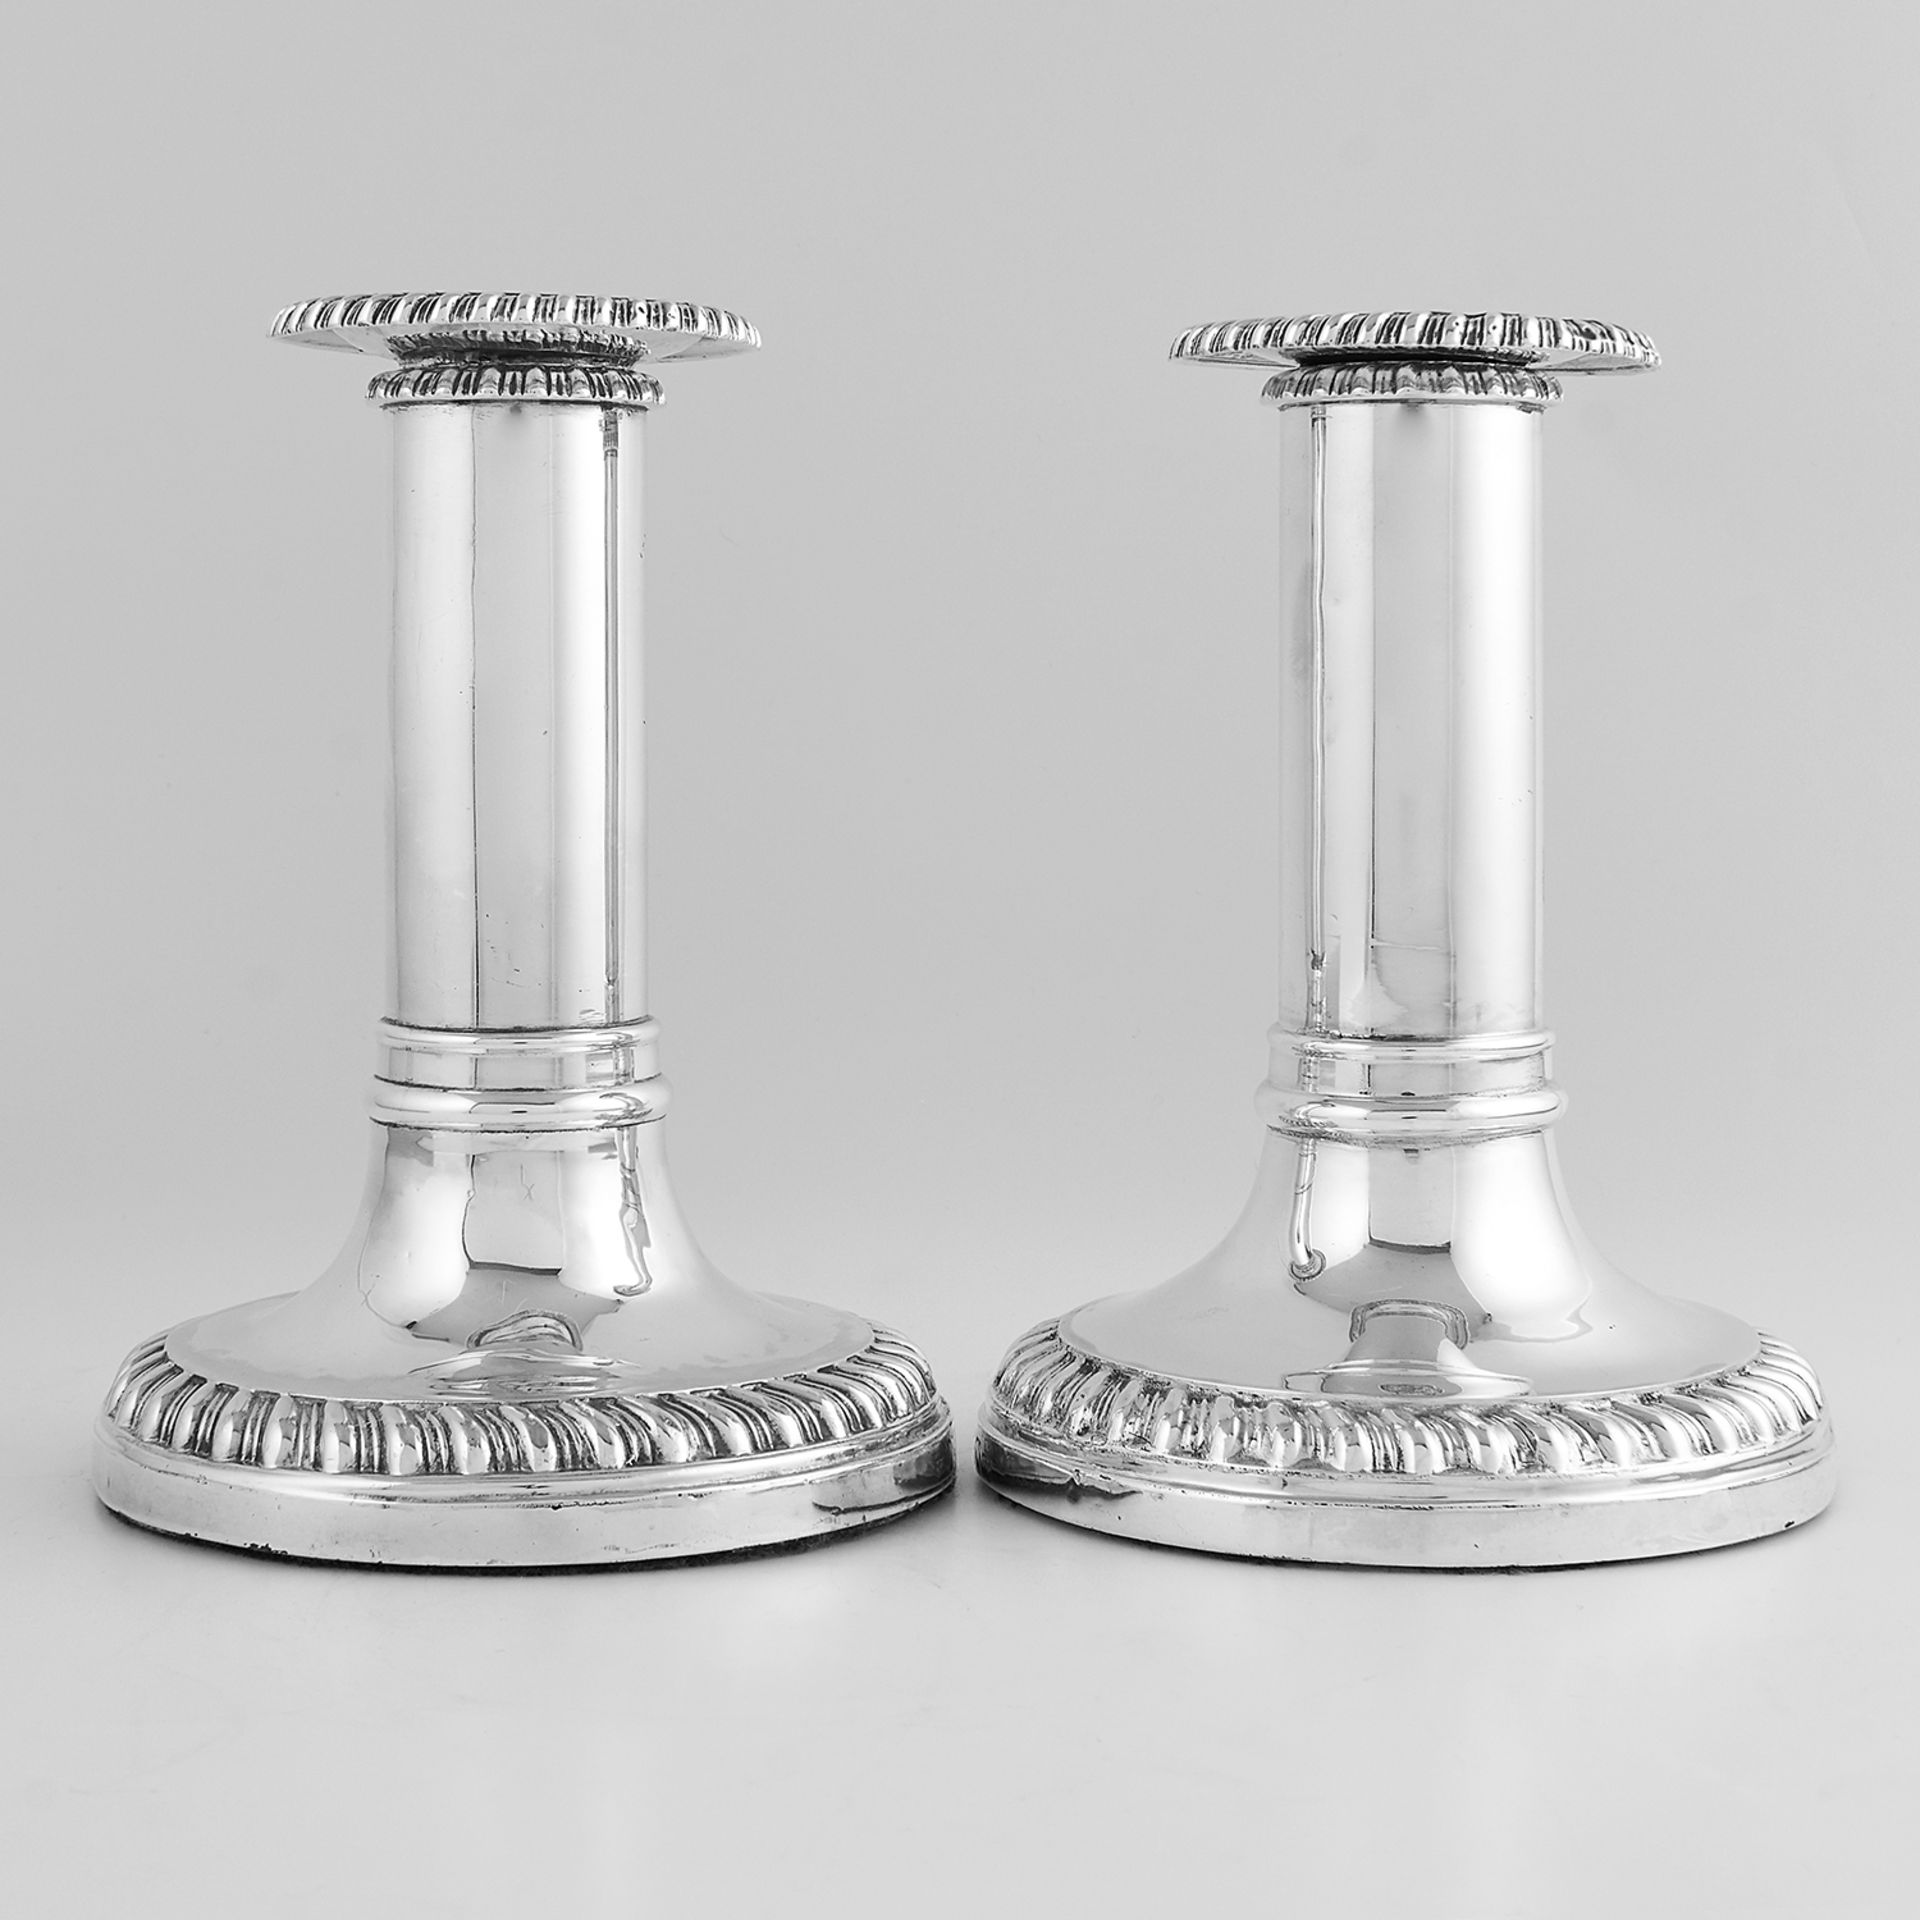 PAIR OF ANTIQUE GEORGE III STERLING SILVER CANDLE STICKS, JOHN & THOMAS SETTLE, SHEFFIELD 1817 the